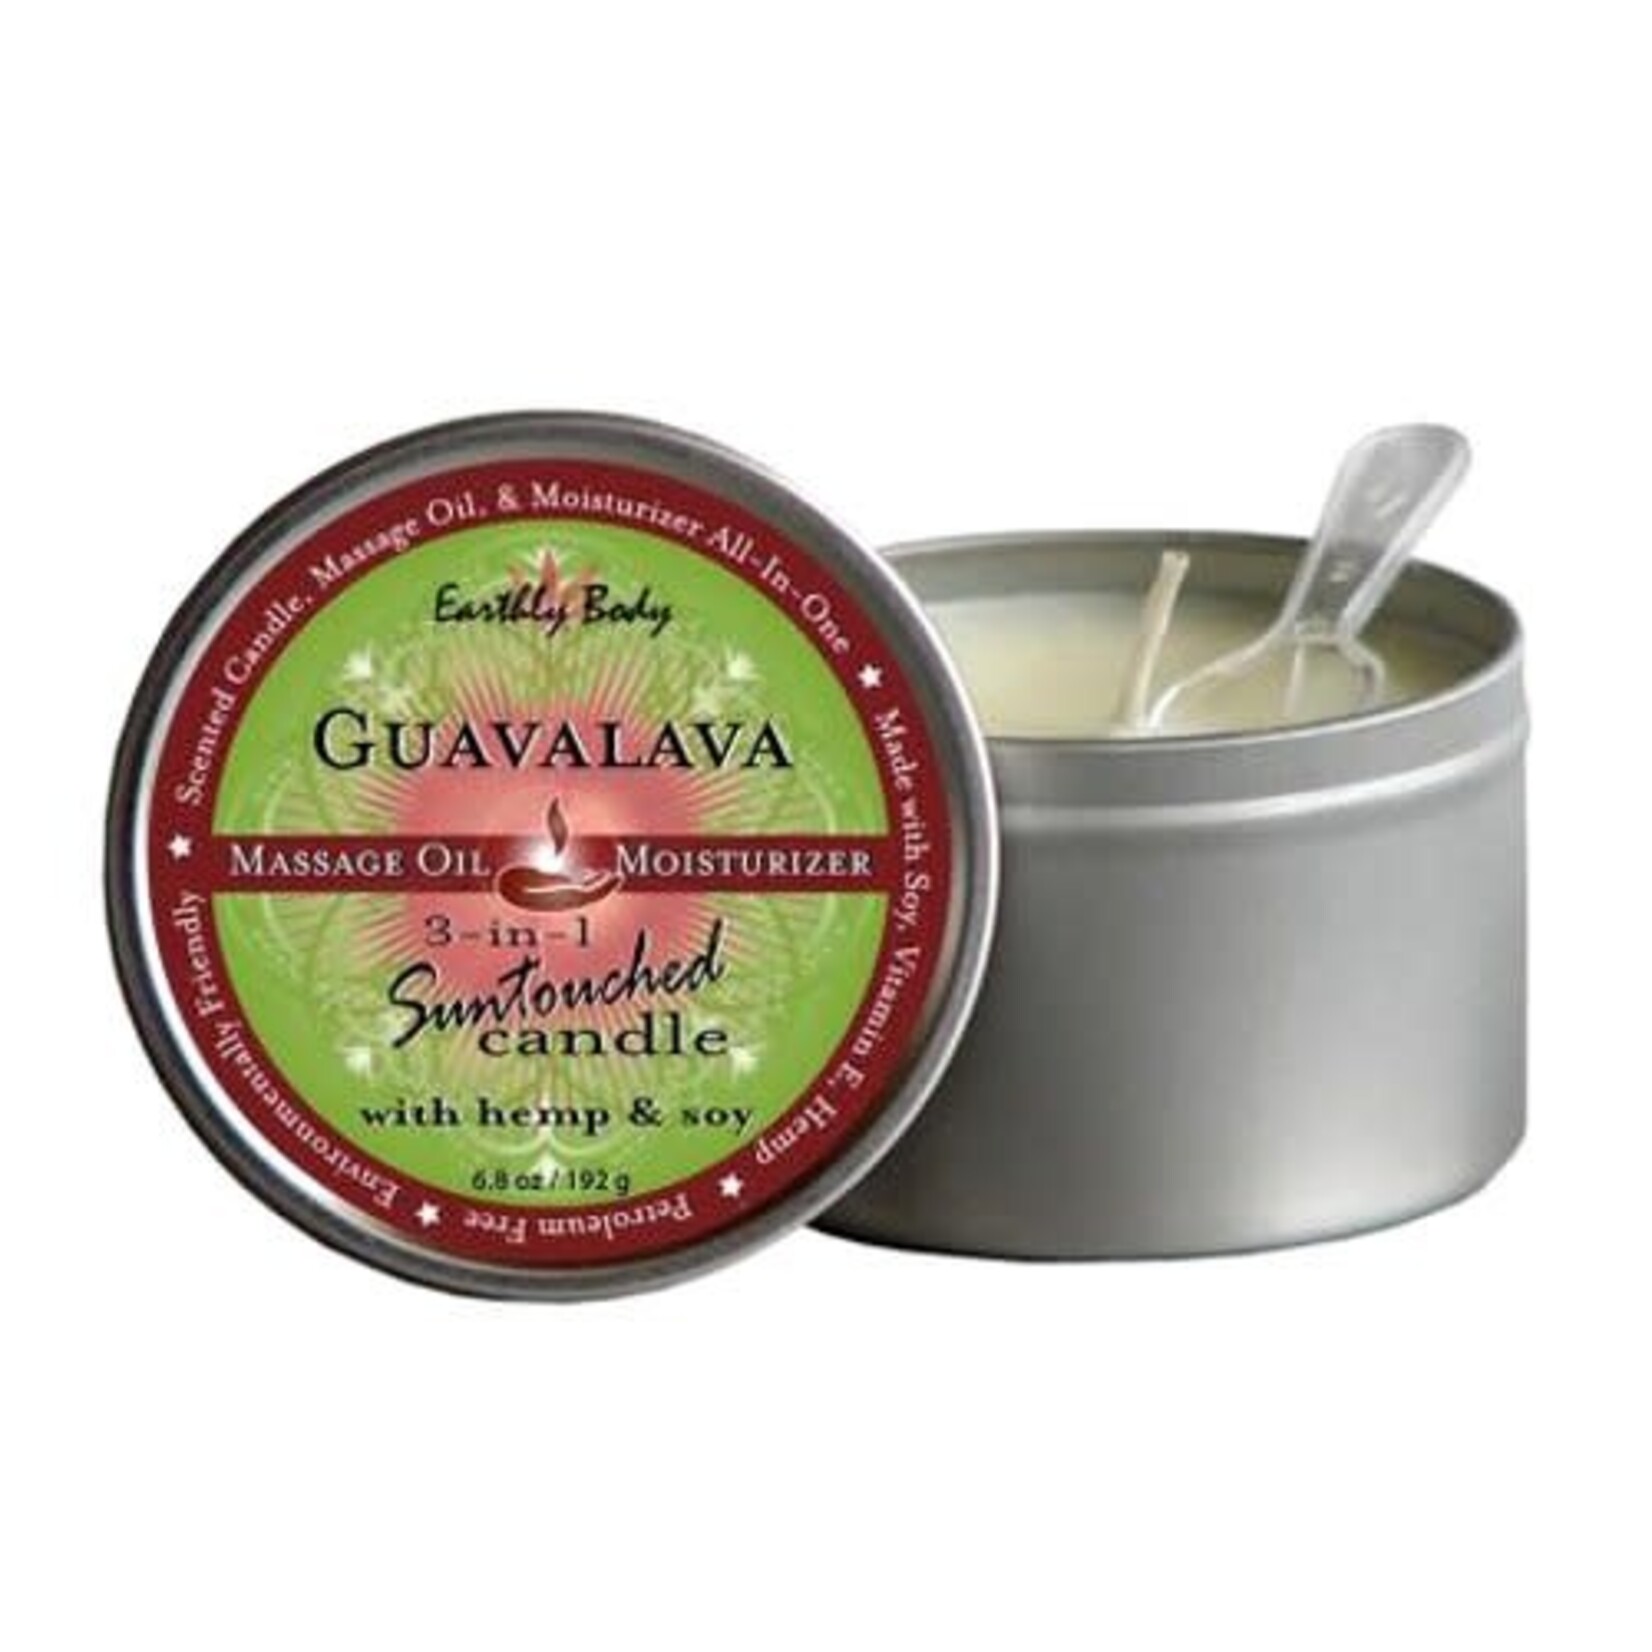 EARTHLY BODY EARTHLY BODY - ROUND CANDLES GUAVALAVA 6OZ.